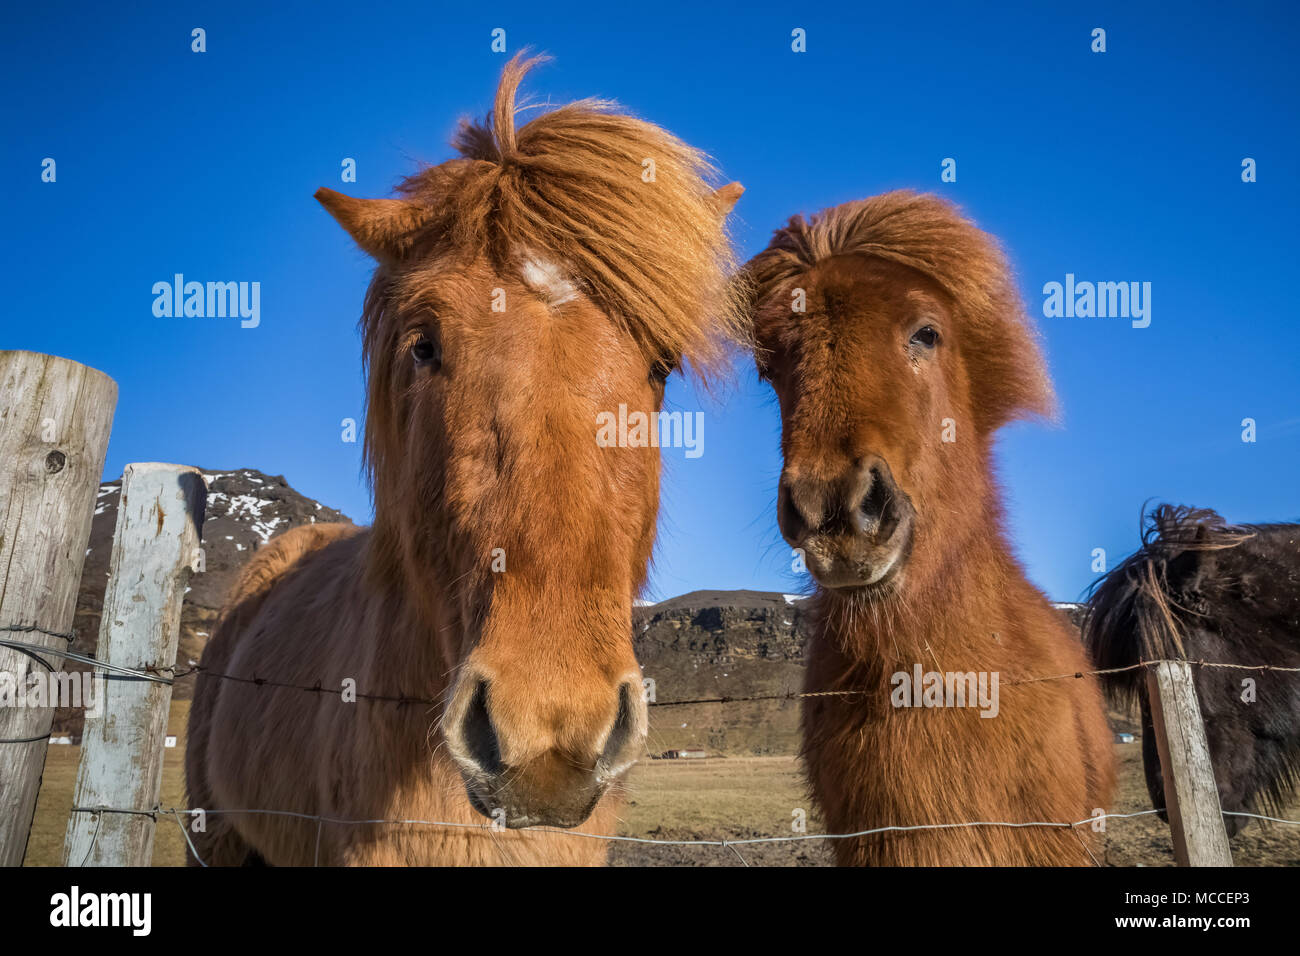 Icelandic Horses, a distinctive breed known for its hardiness, friendliness, and unusual gait, at a farm along the South Coast of Iceland Stock Photo